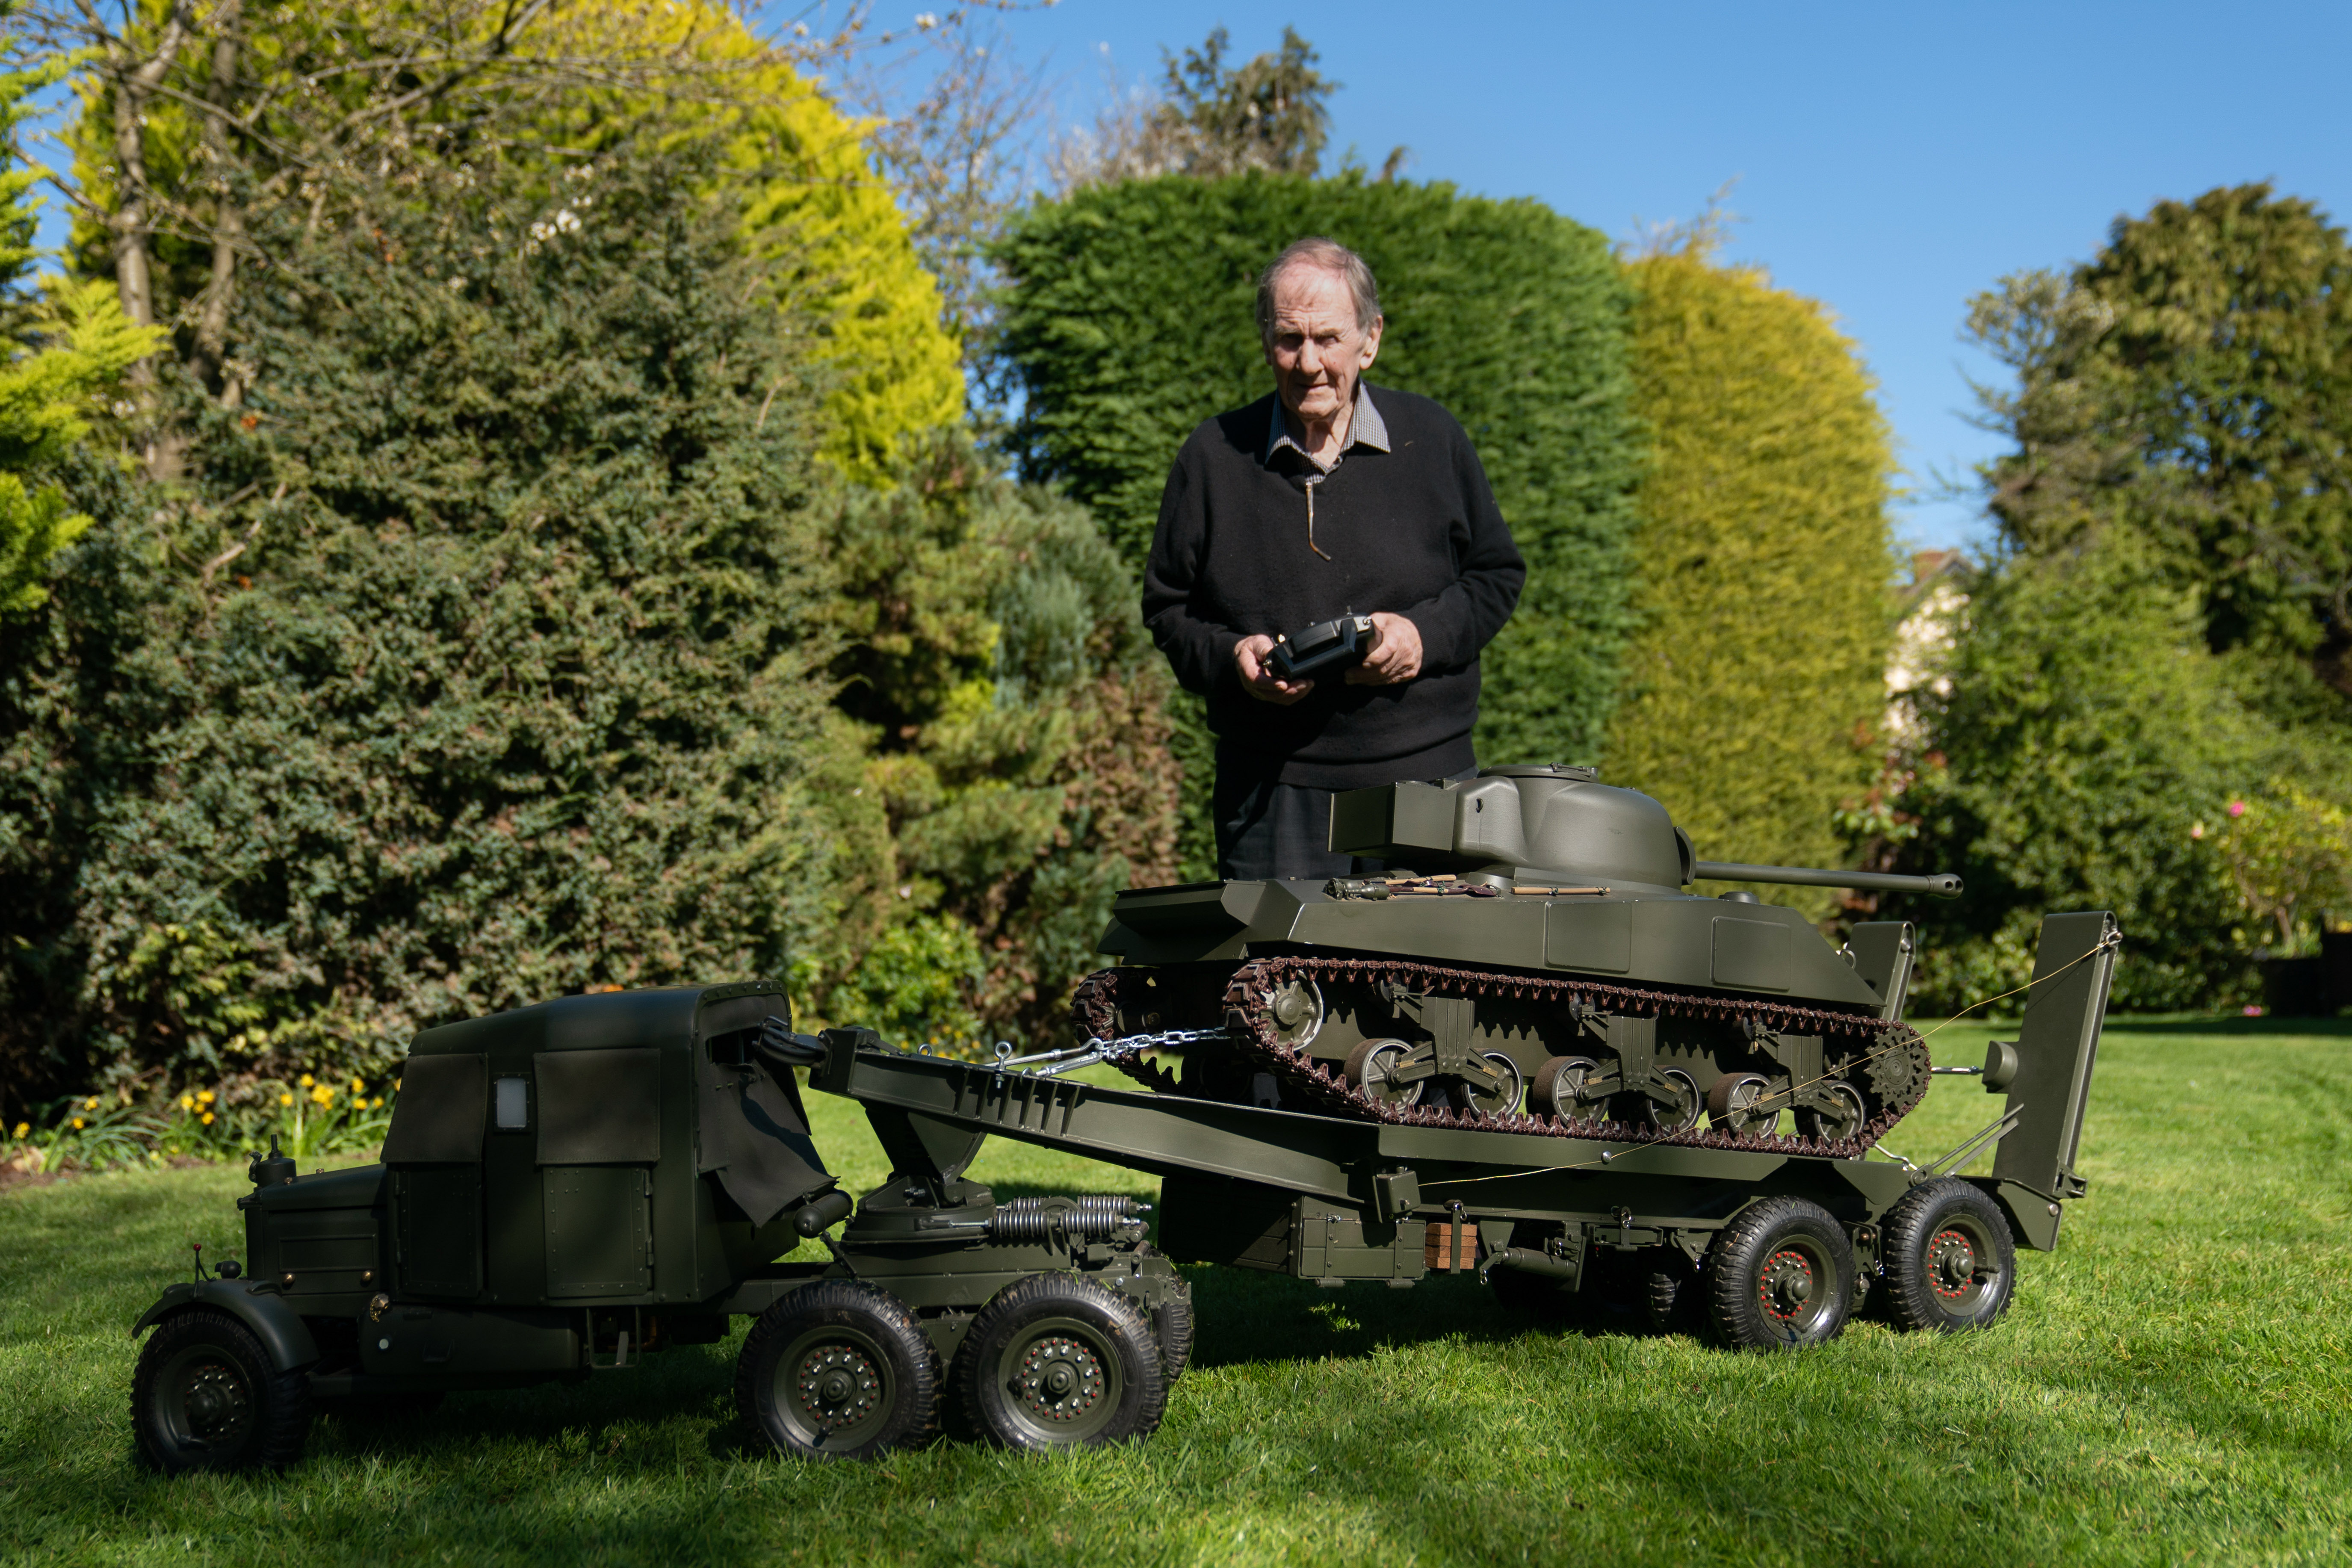 Roland Hopper, 79, built the scale model tank and transporter as he was bored in retirement. (Joe Giddens/ PA)